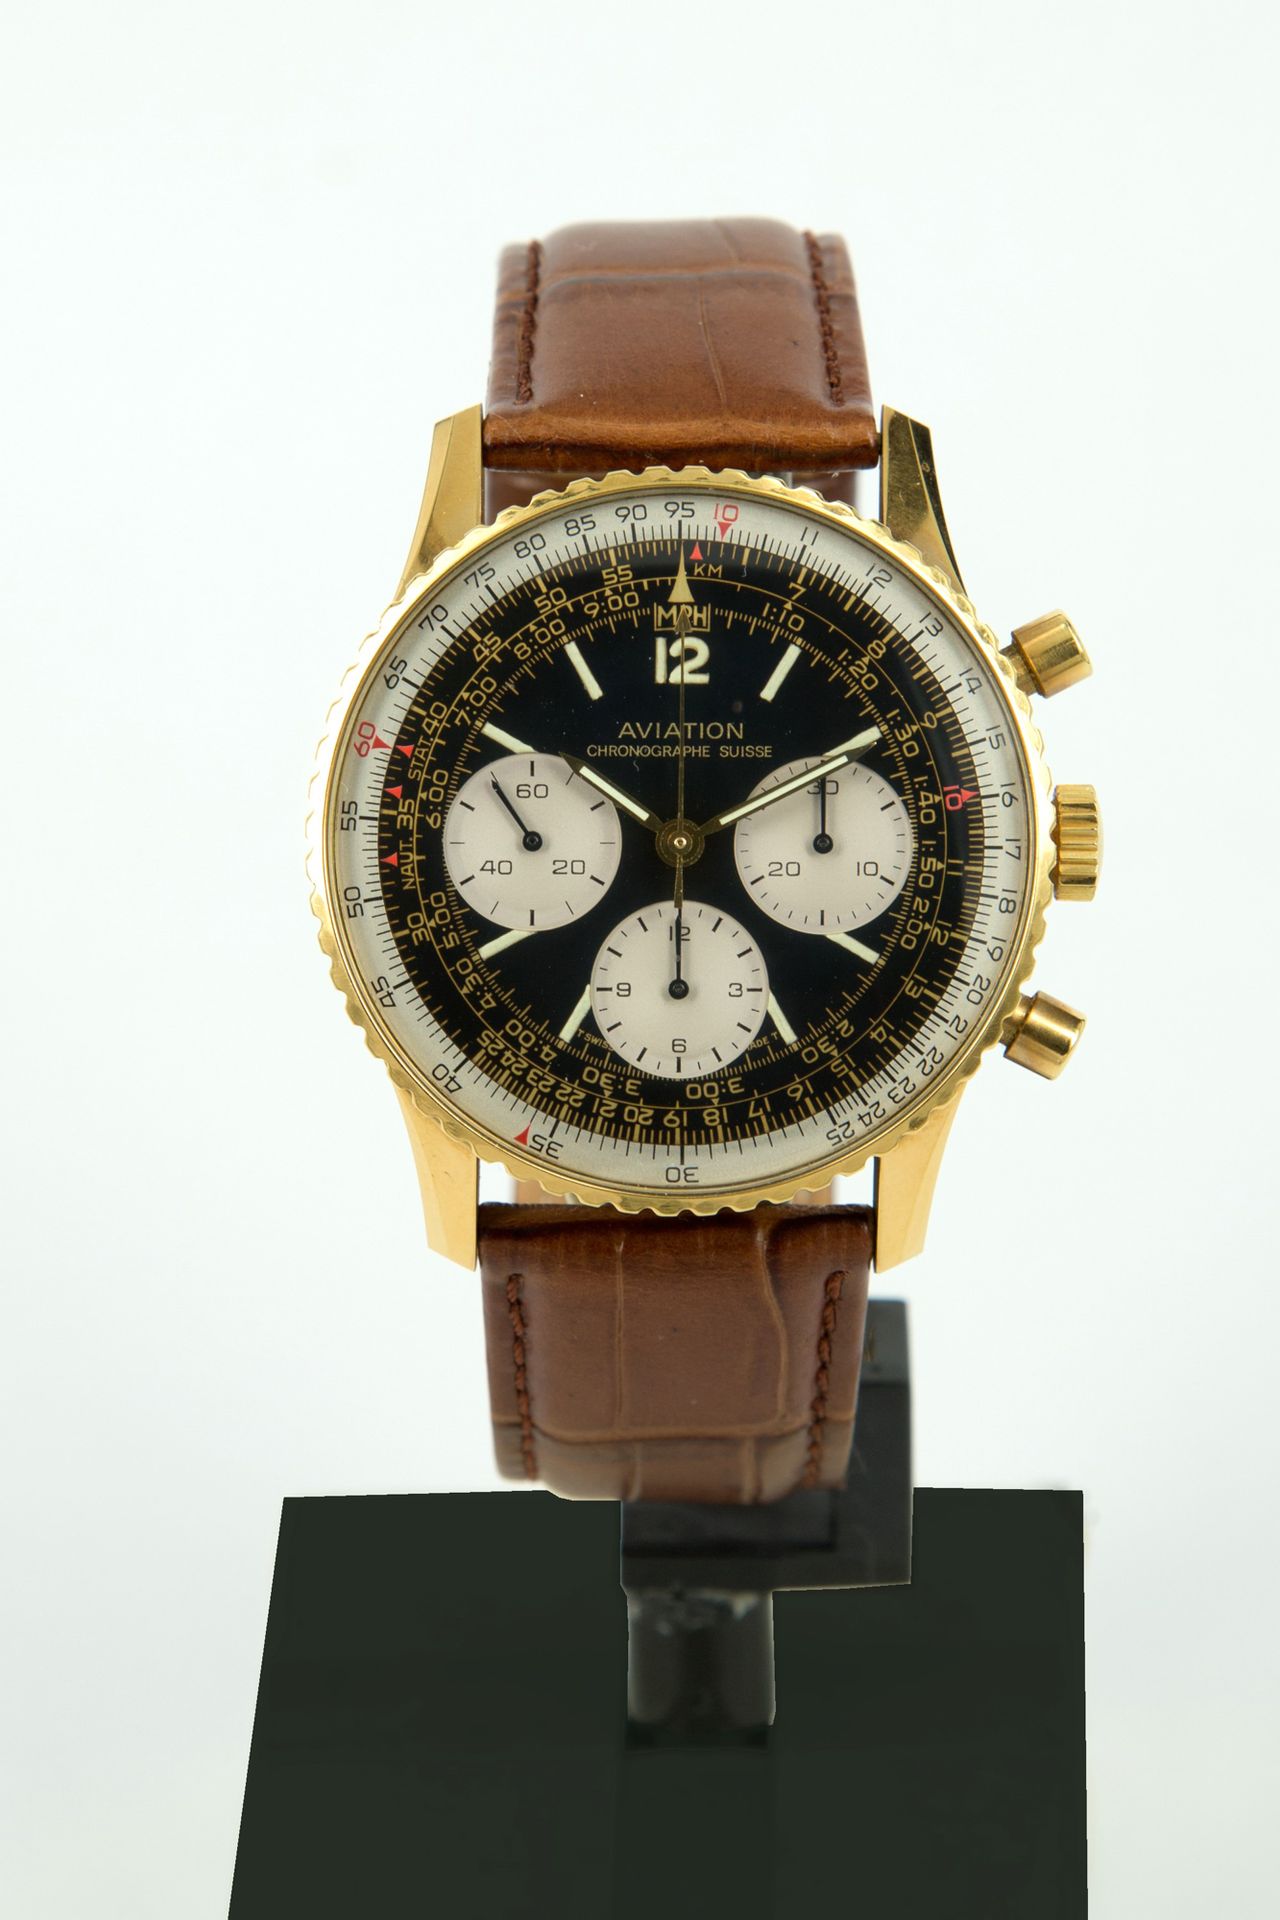 AVIATION Chronographe Suisse gold and leather Reloj automático Chronographe Suis&hellip;